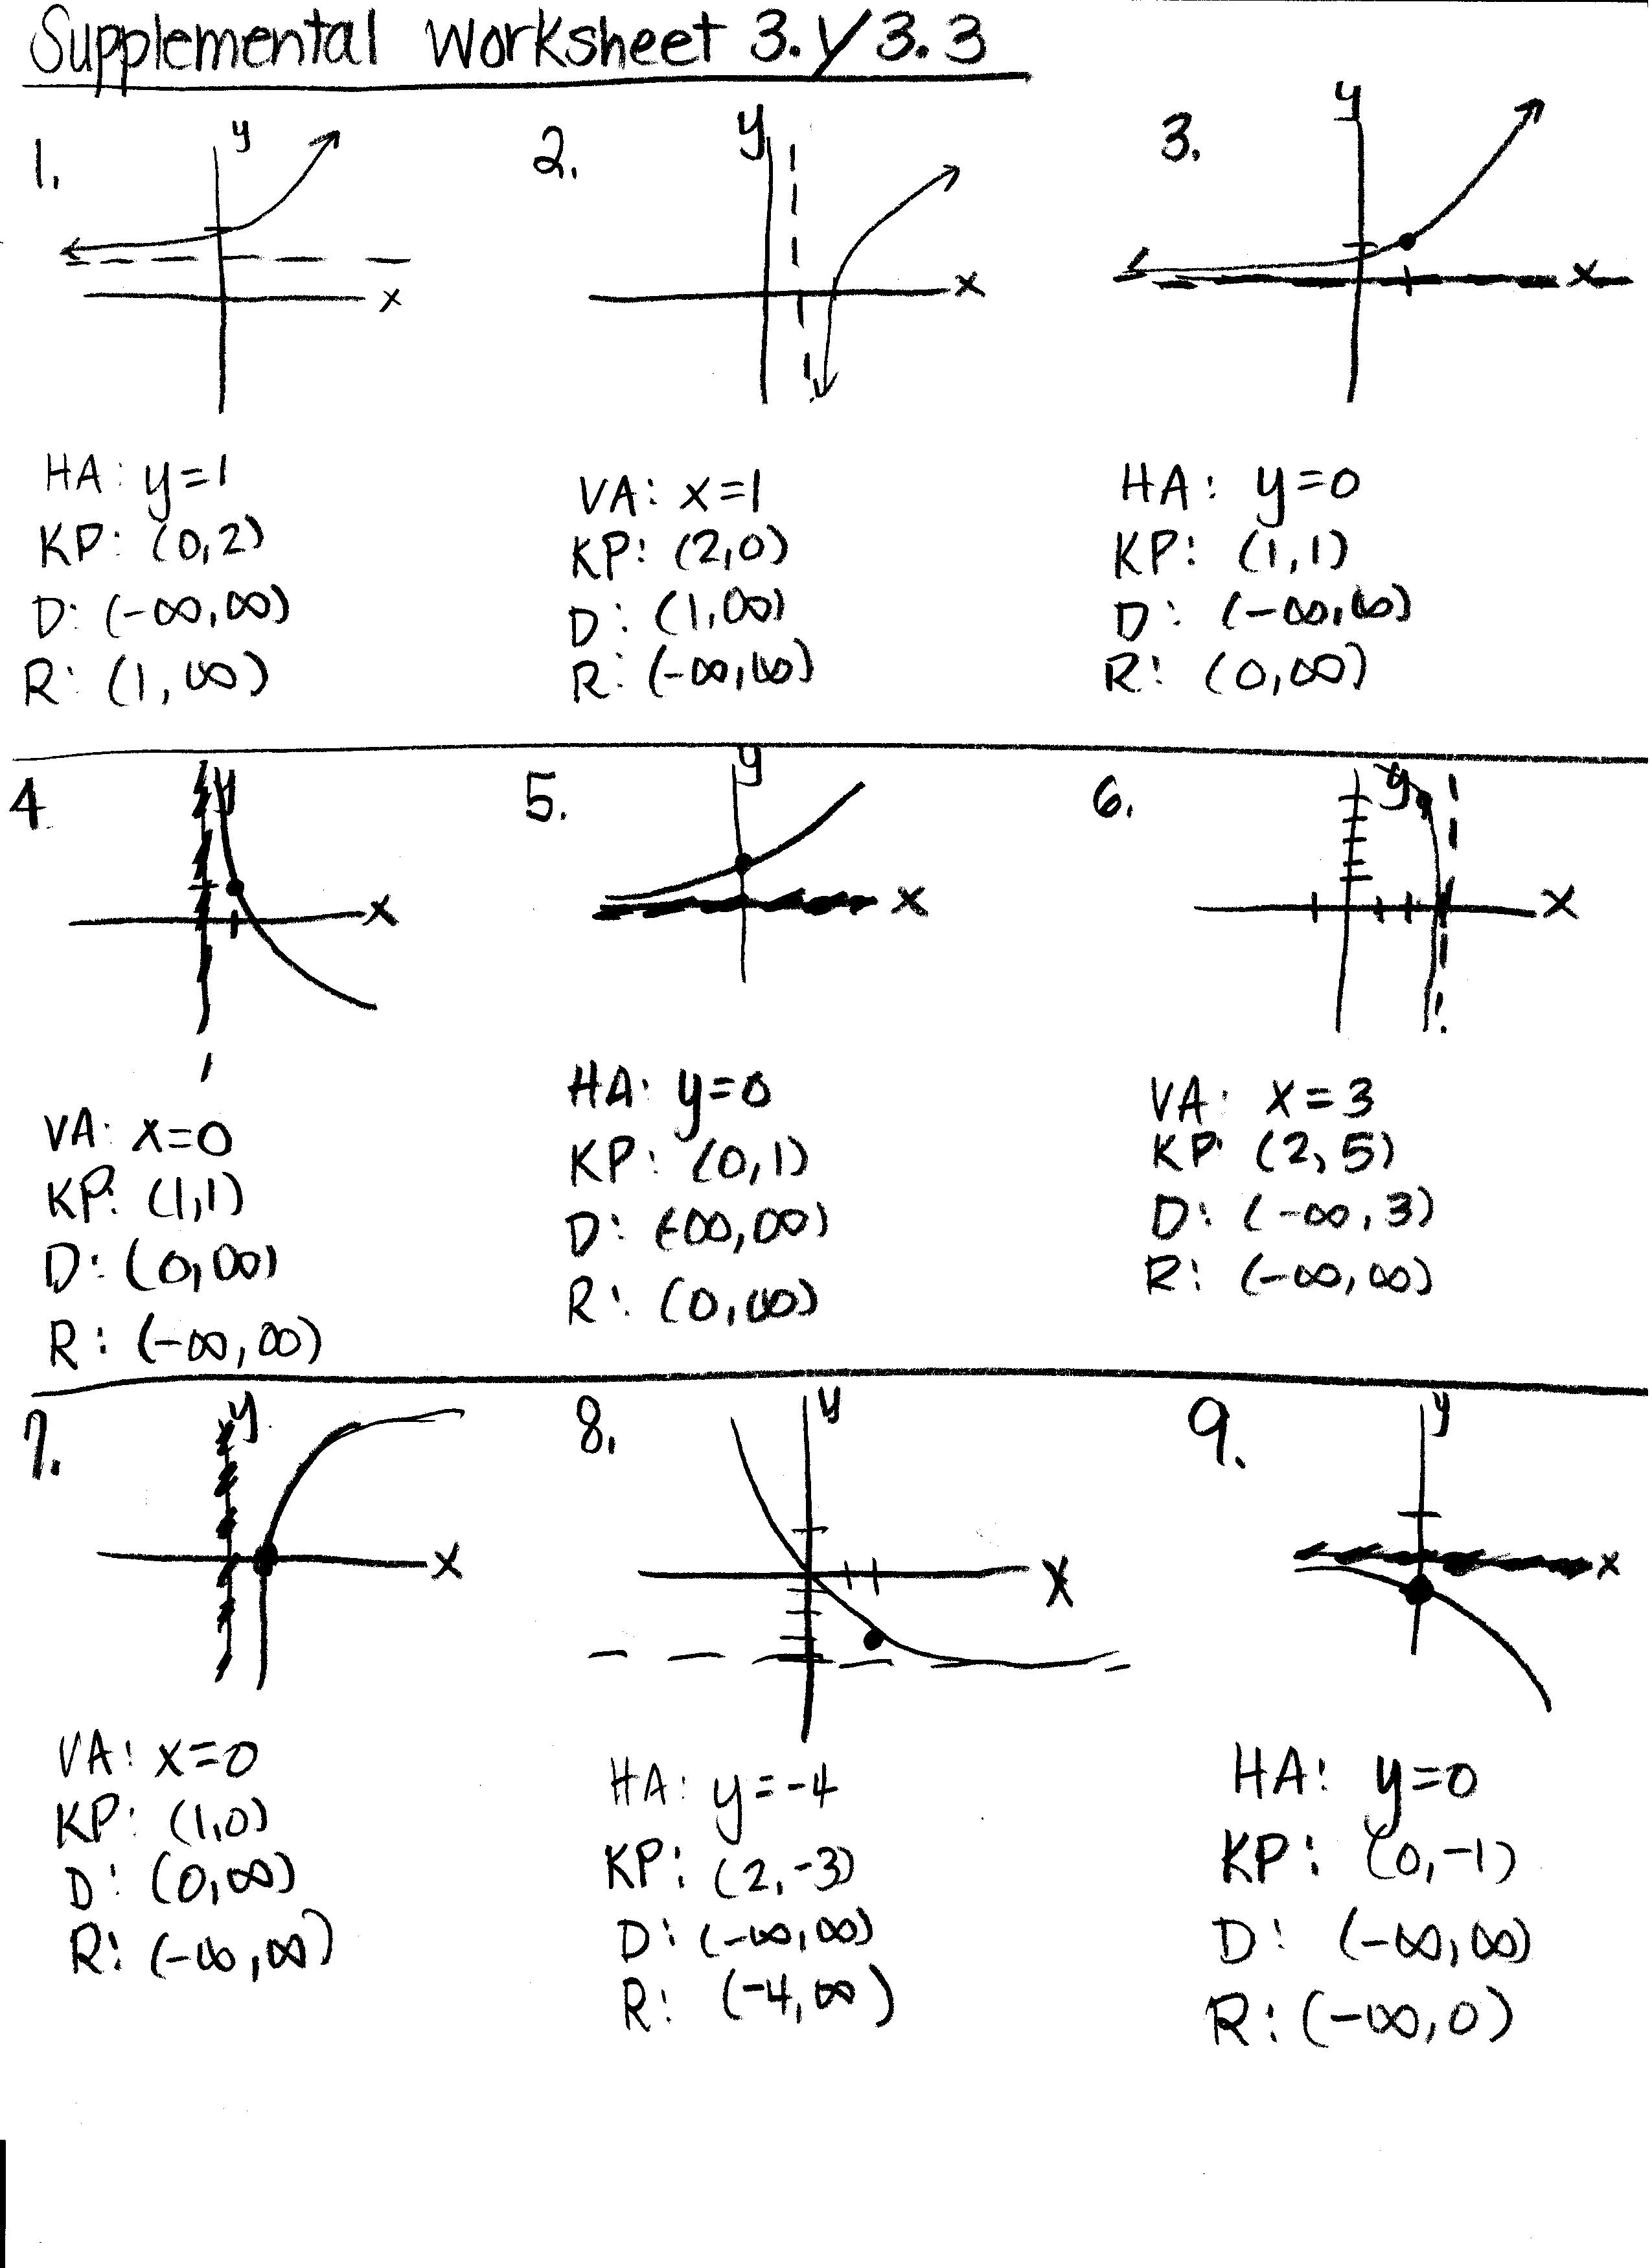 transformations-of-exponential-functions-worksheet-with-answers-mobinspire